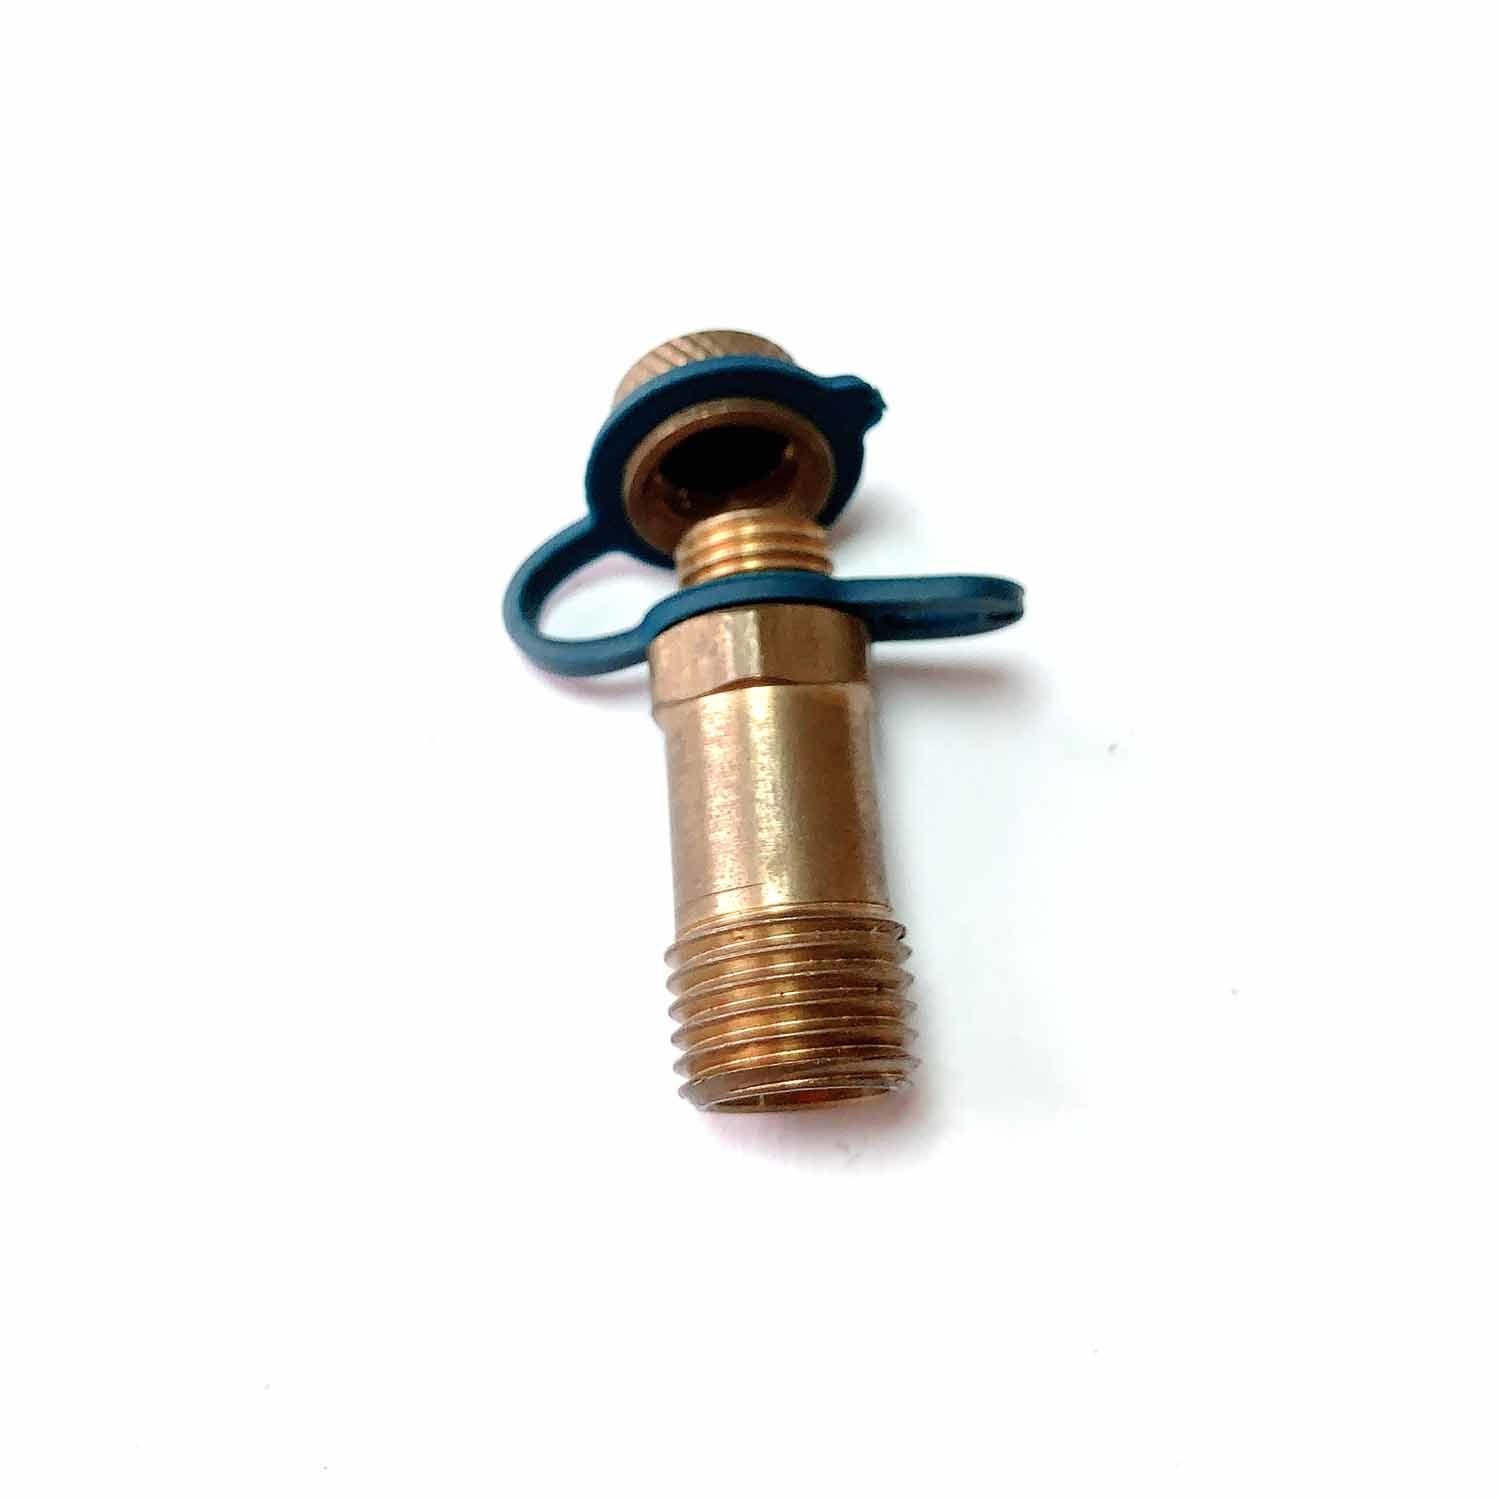 Brass Manual Air Vent Valves for Hot Water Heating Radiators